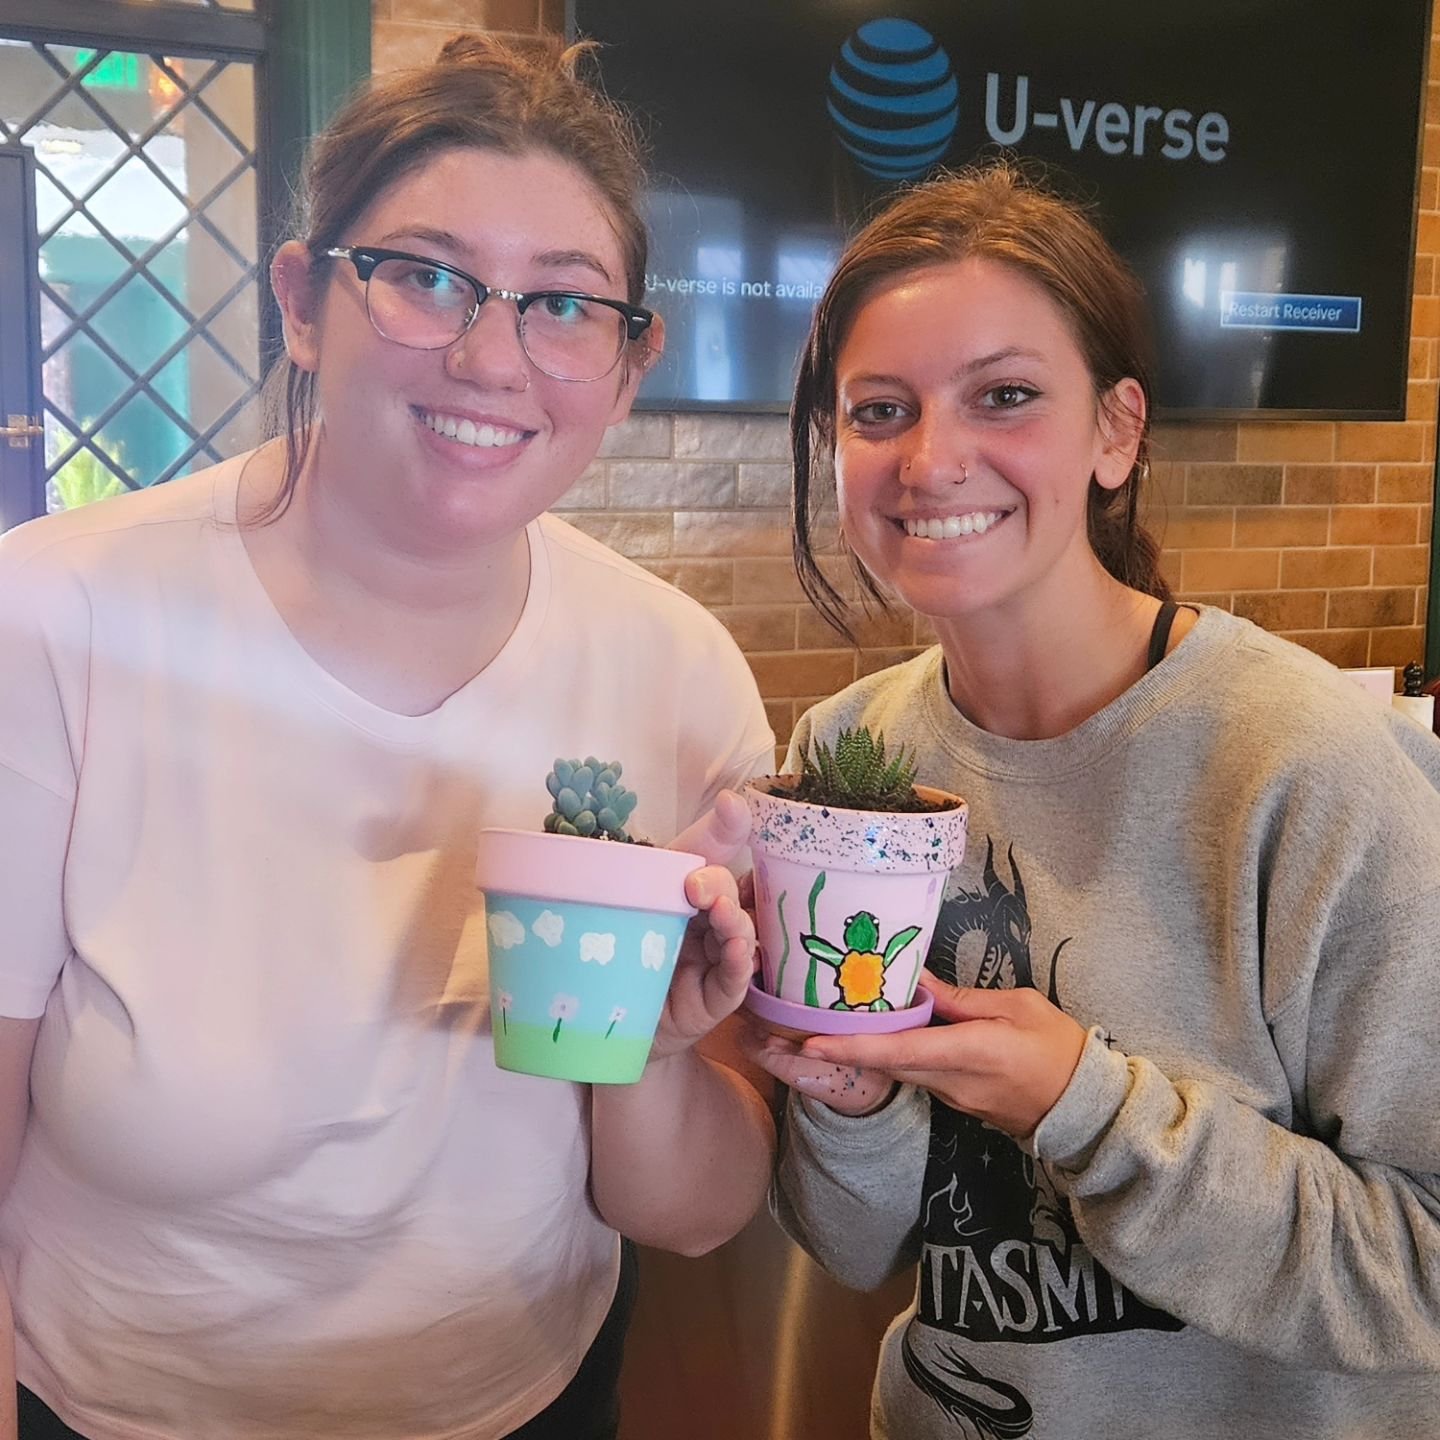 Thank you to all of our residents that stopped down for our Succulents and Sips event! It was great to see everyone show off their green thumb👍 and their artistic abilities! #harperhouse #lovewhereyoulive #youshouldlivehere #Succulents #residenteven